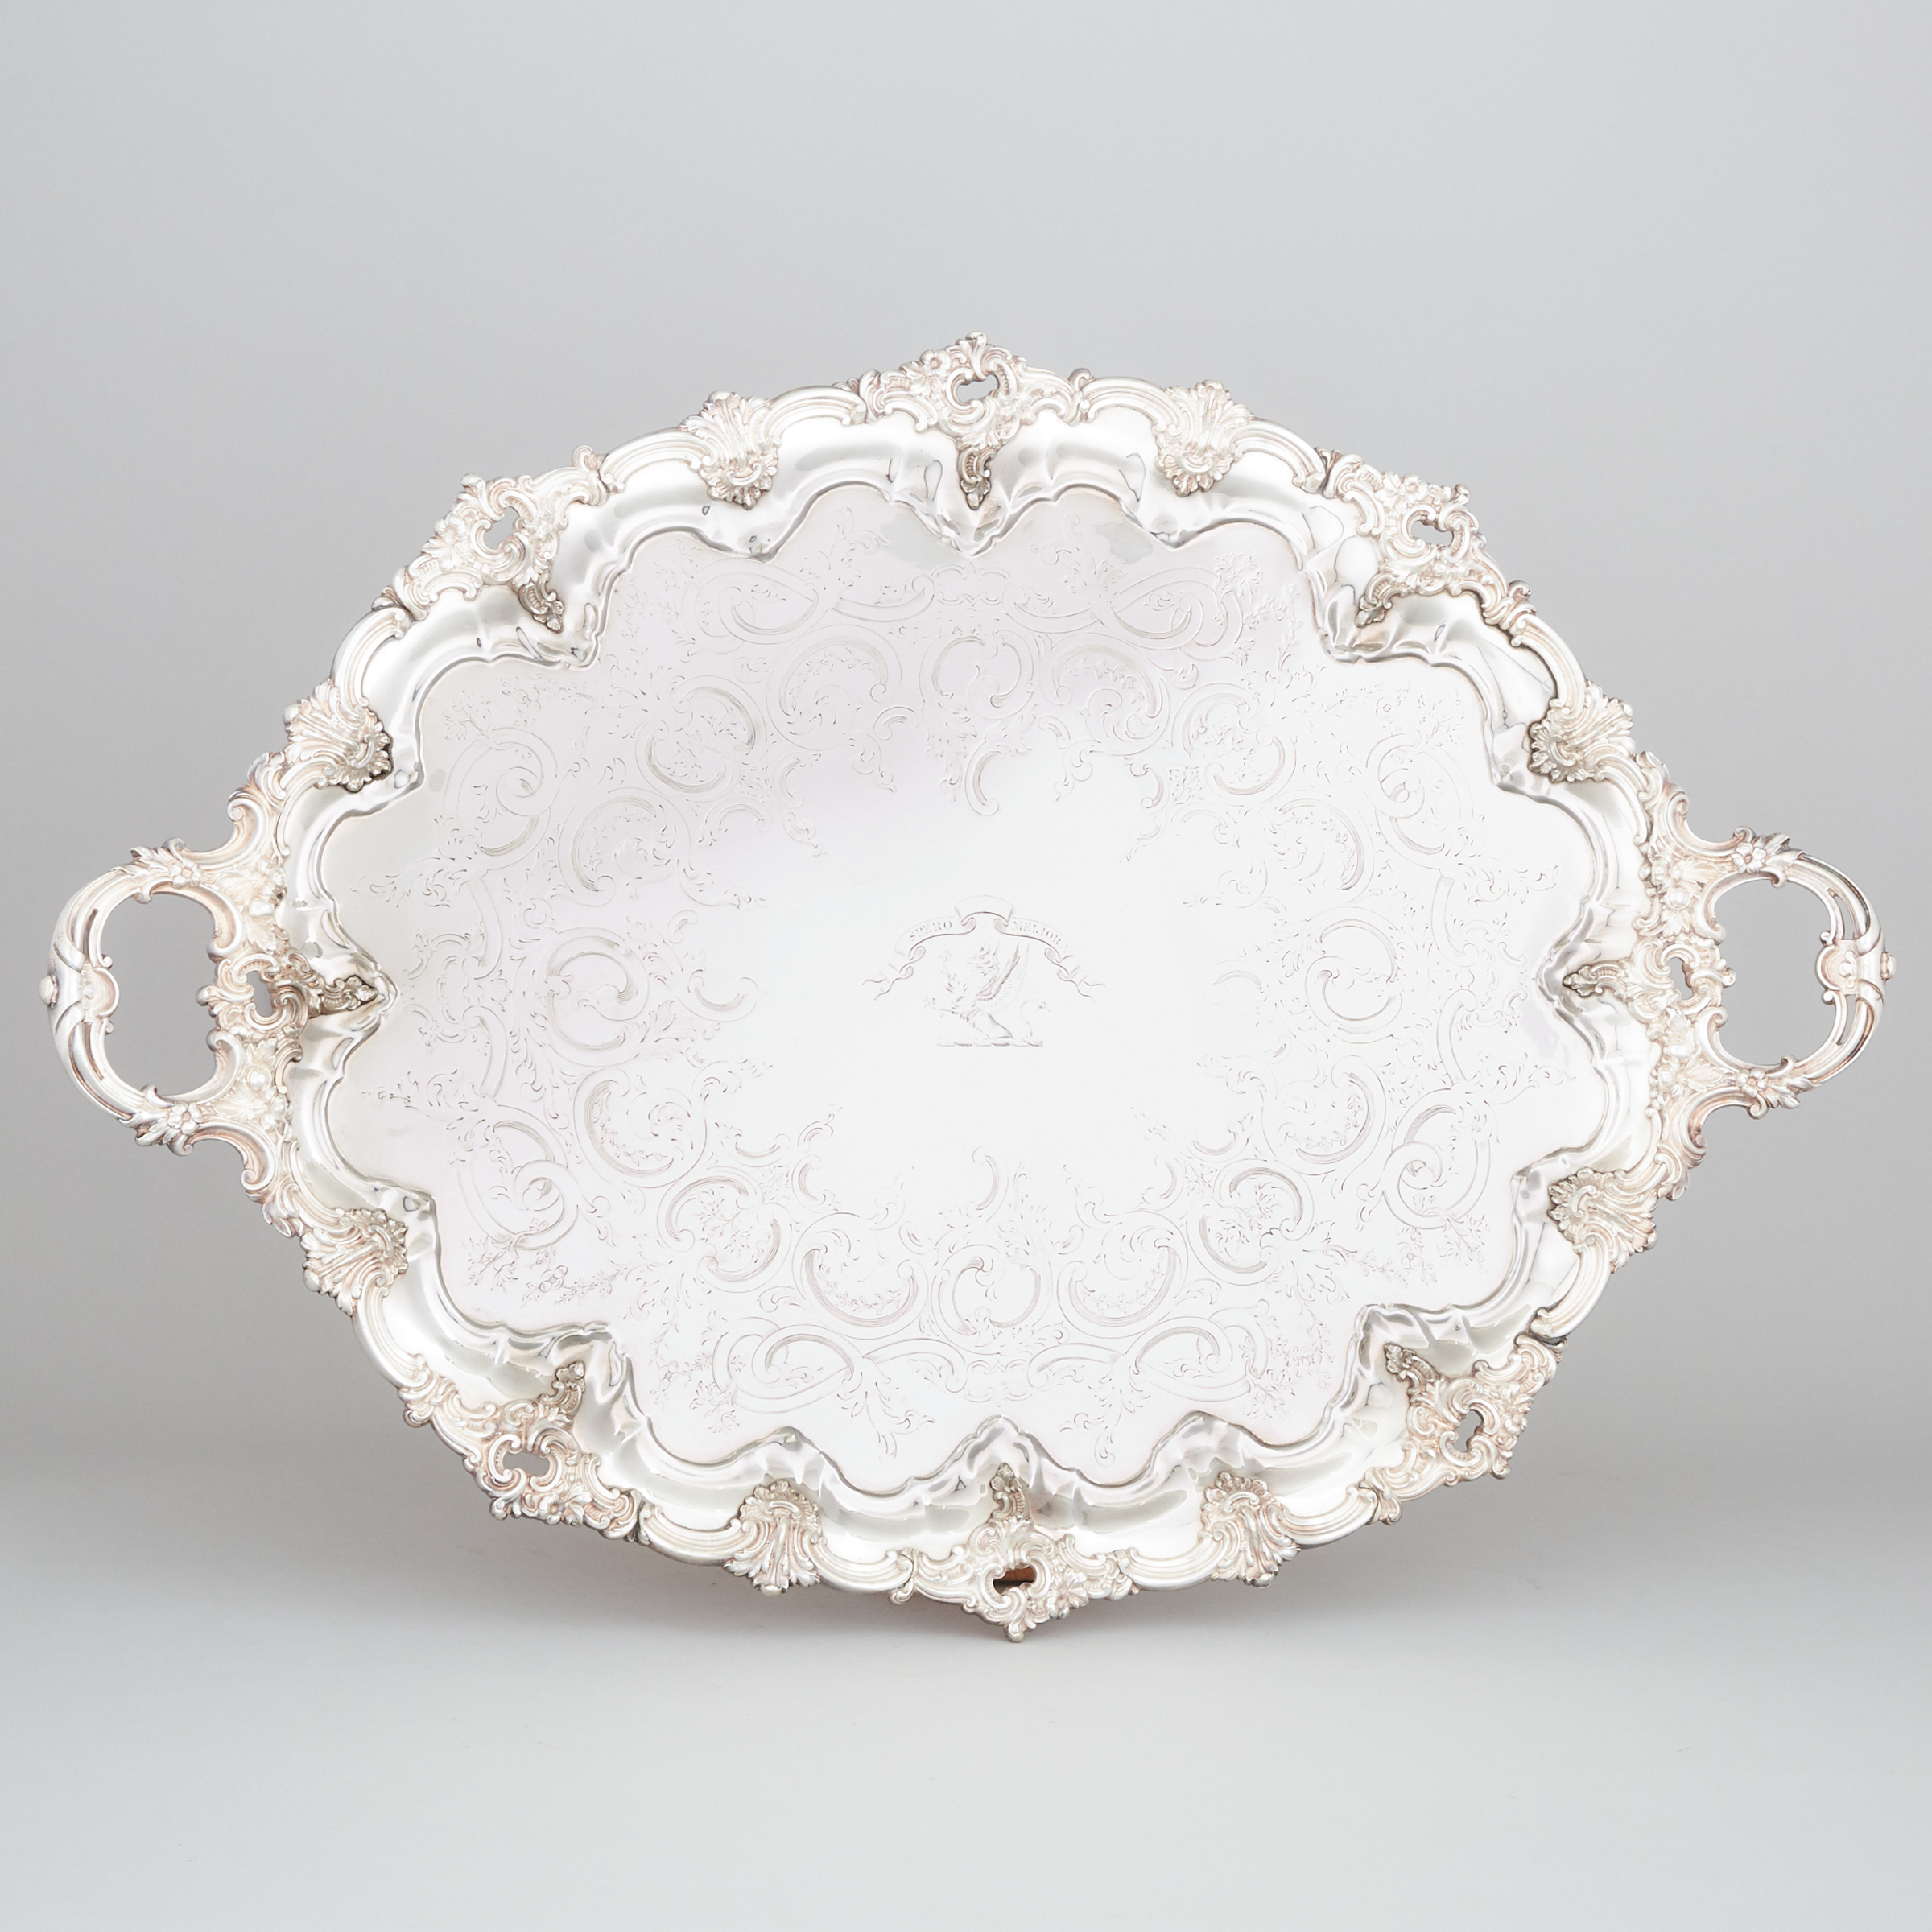 Victorian Silver Plated Two-Handled Oval Serving Tray, Henry Wilkinson & Co., mid-19th century